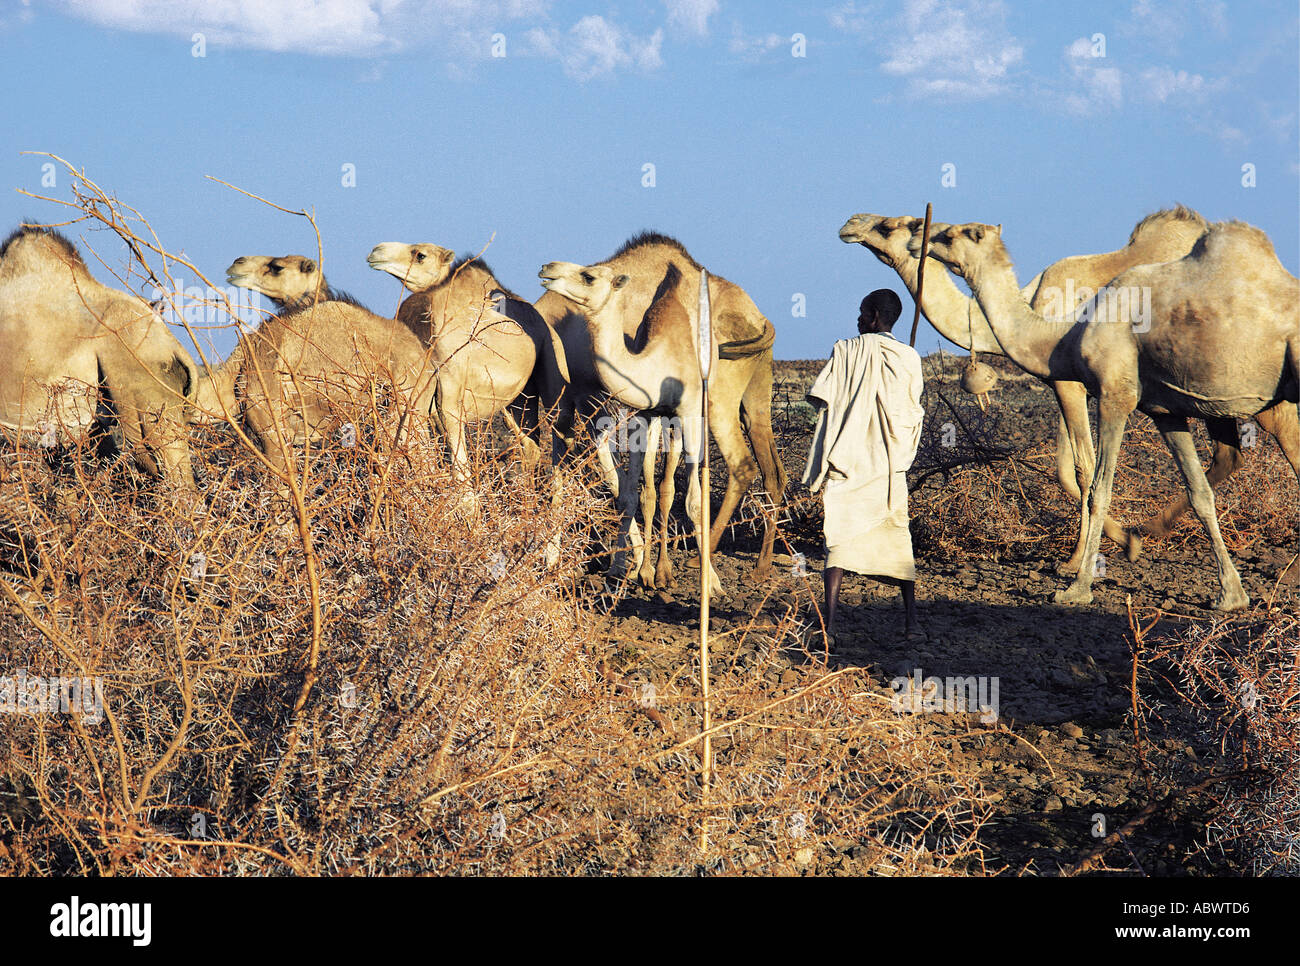 Gabbra youth with his camels preparing to leave his settlement to search for browse for the camels Stock Photo